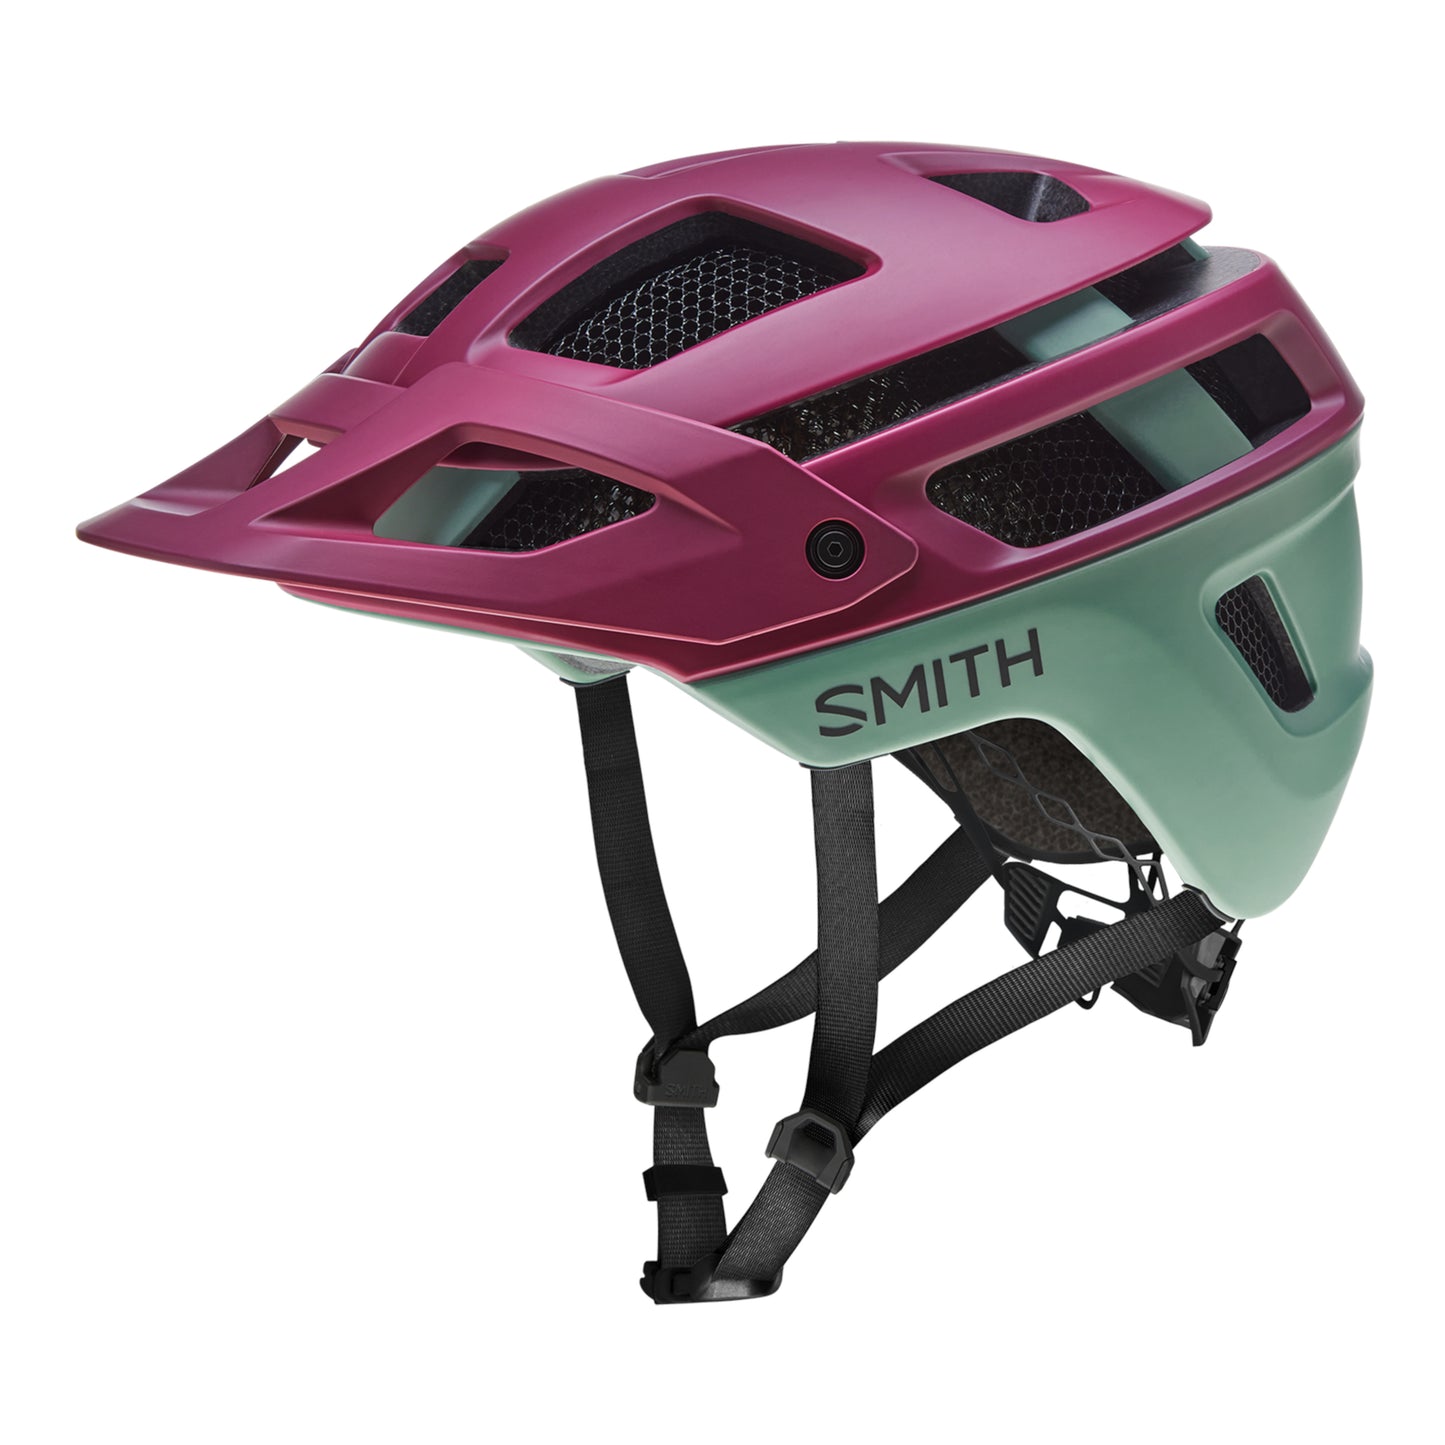 Smith Optics Forefront MIPS MTB Trail Helmet Matte Merlot Aloe side view on Fly Rides